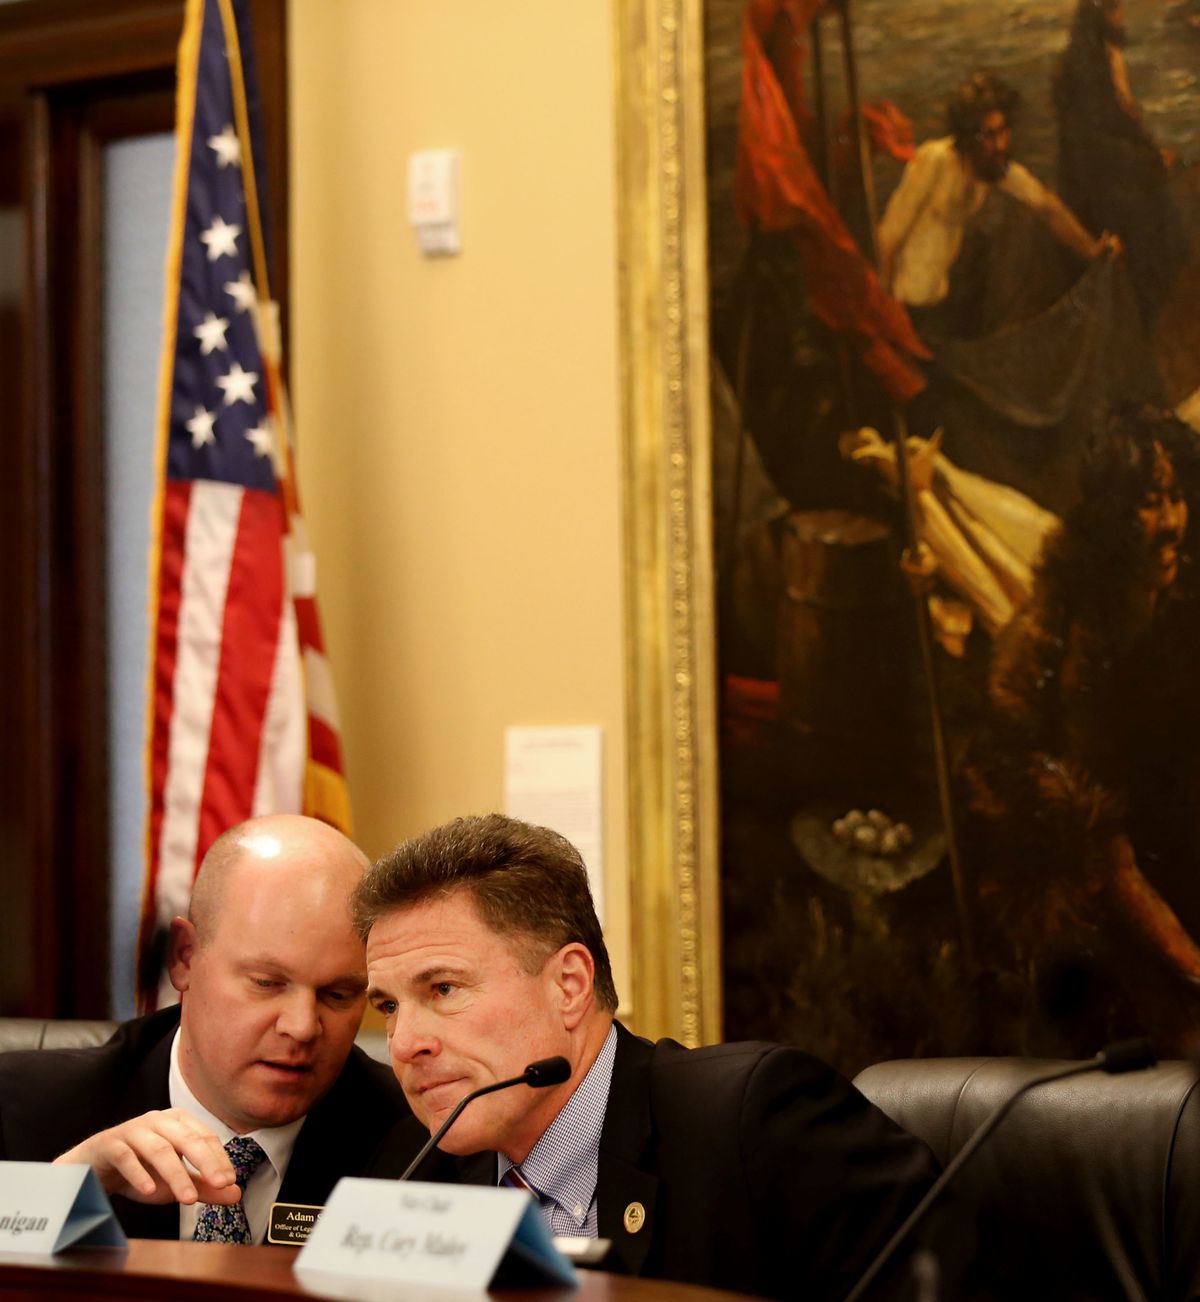 Policy analyst Adam J. Sweet, left, and Rep. Jim Dunnigan, R-Taylorsville, confer before the Medicaid Expansion Adjustments bill is discussed at the Capitol in Salt Lake City on Wednesday, Feb. 6, 2019.